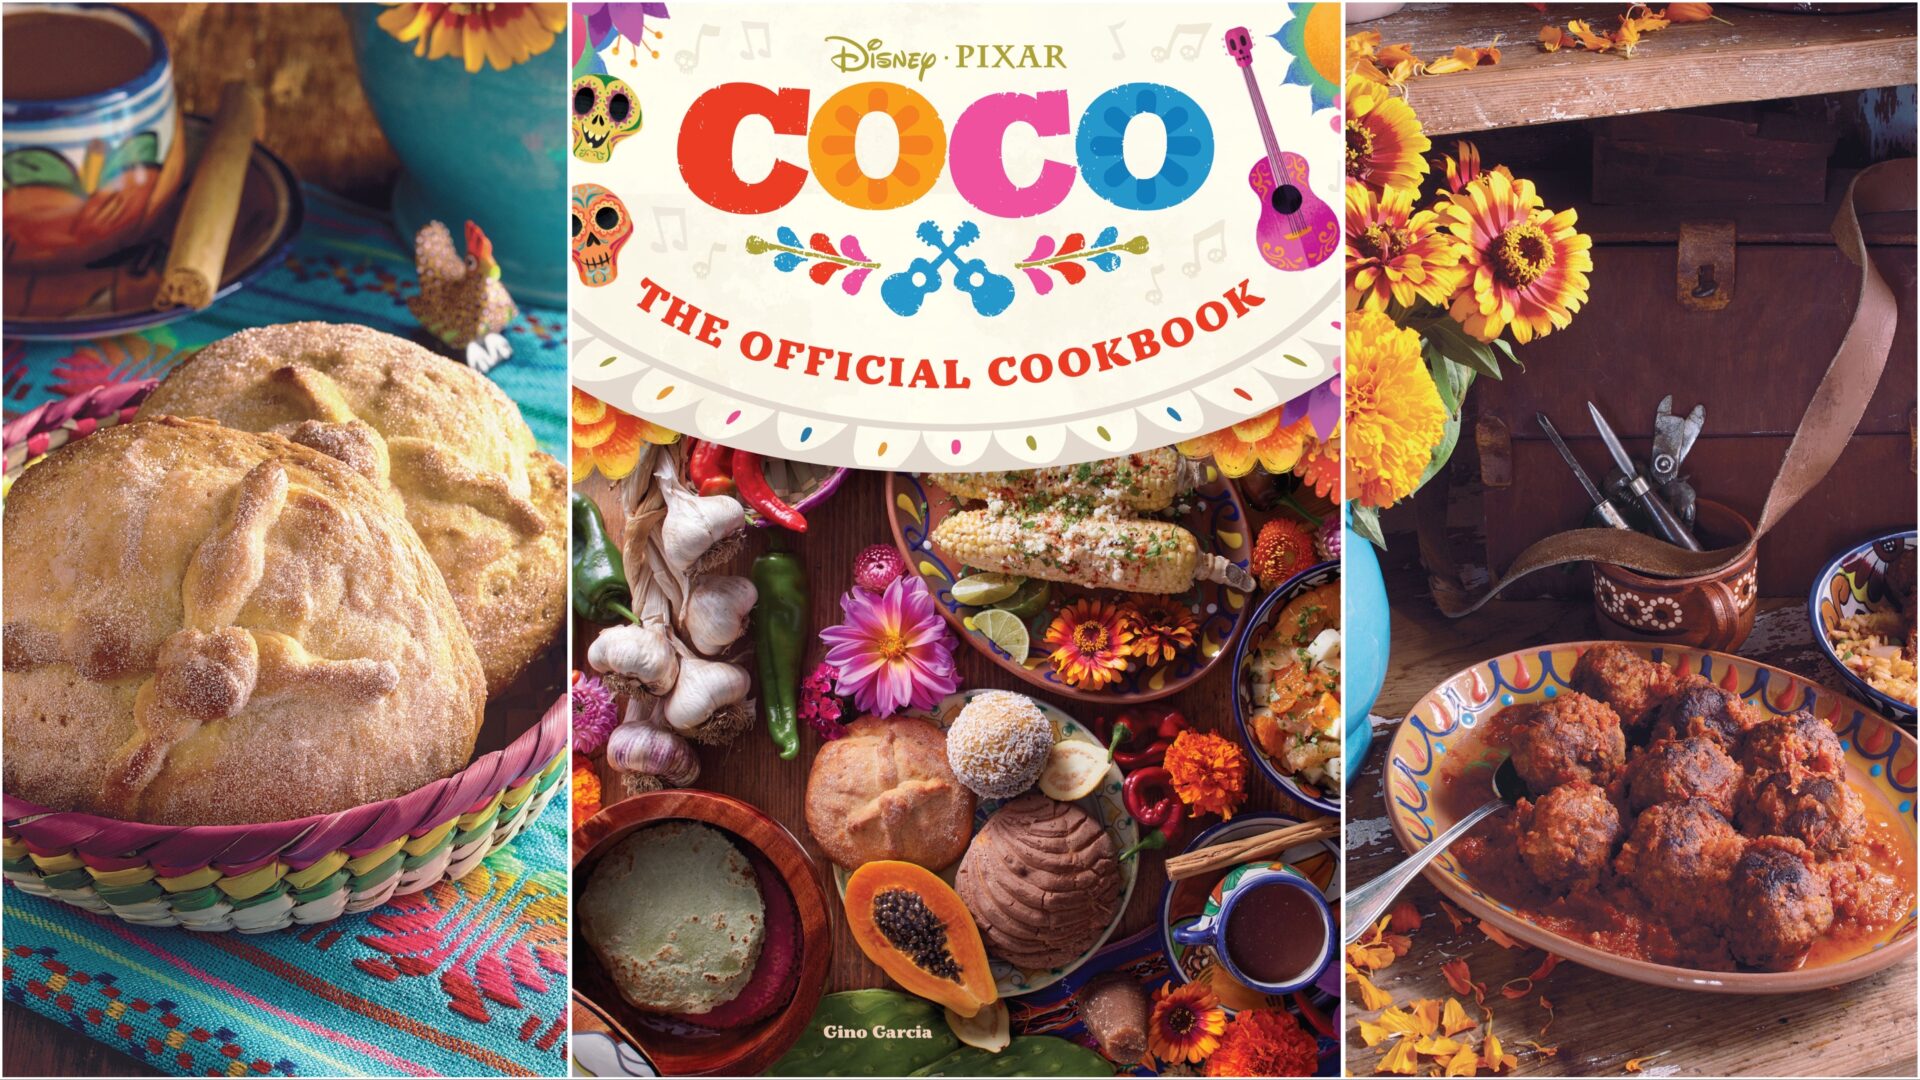 This Coco The Official Cookbook Will Help You Treat Your Familia With Delicious Dishes!